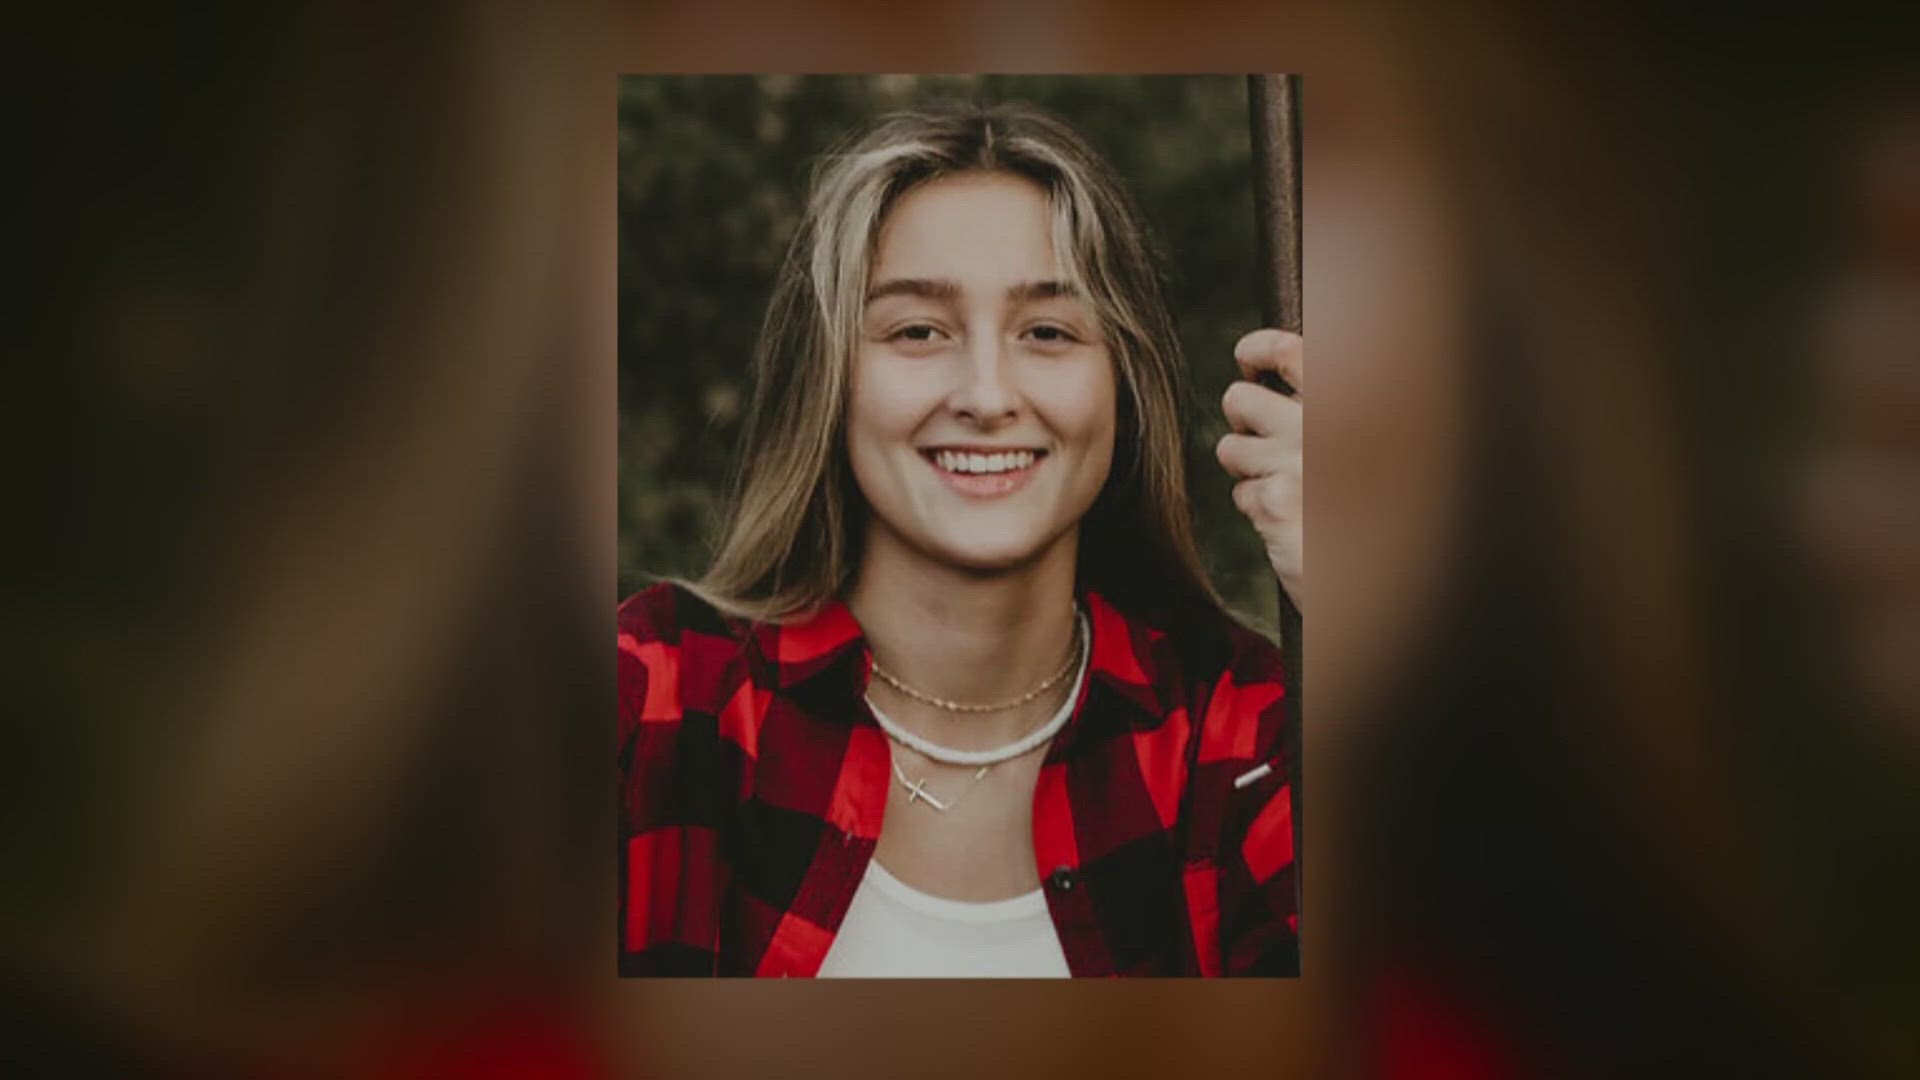 Alexa Bartell was driving when a large rock crashed through her windshield and killed her in April— three suspects have been charged with murder.